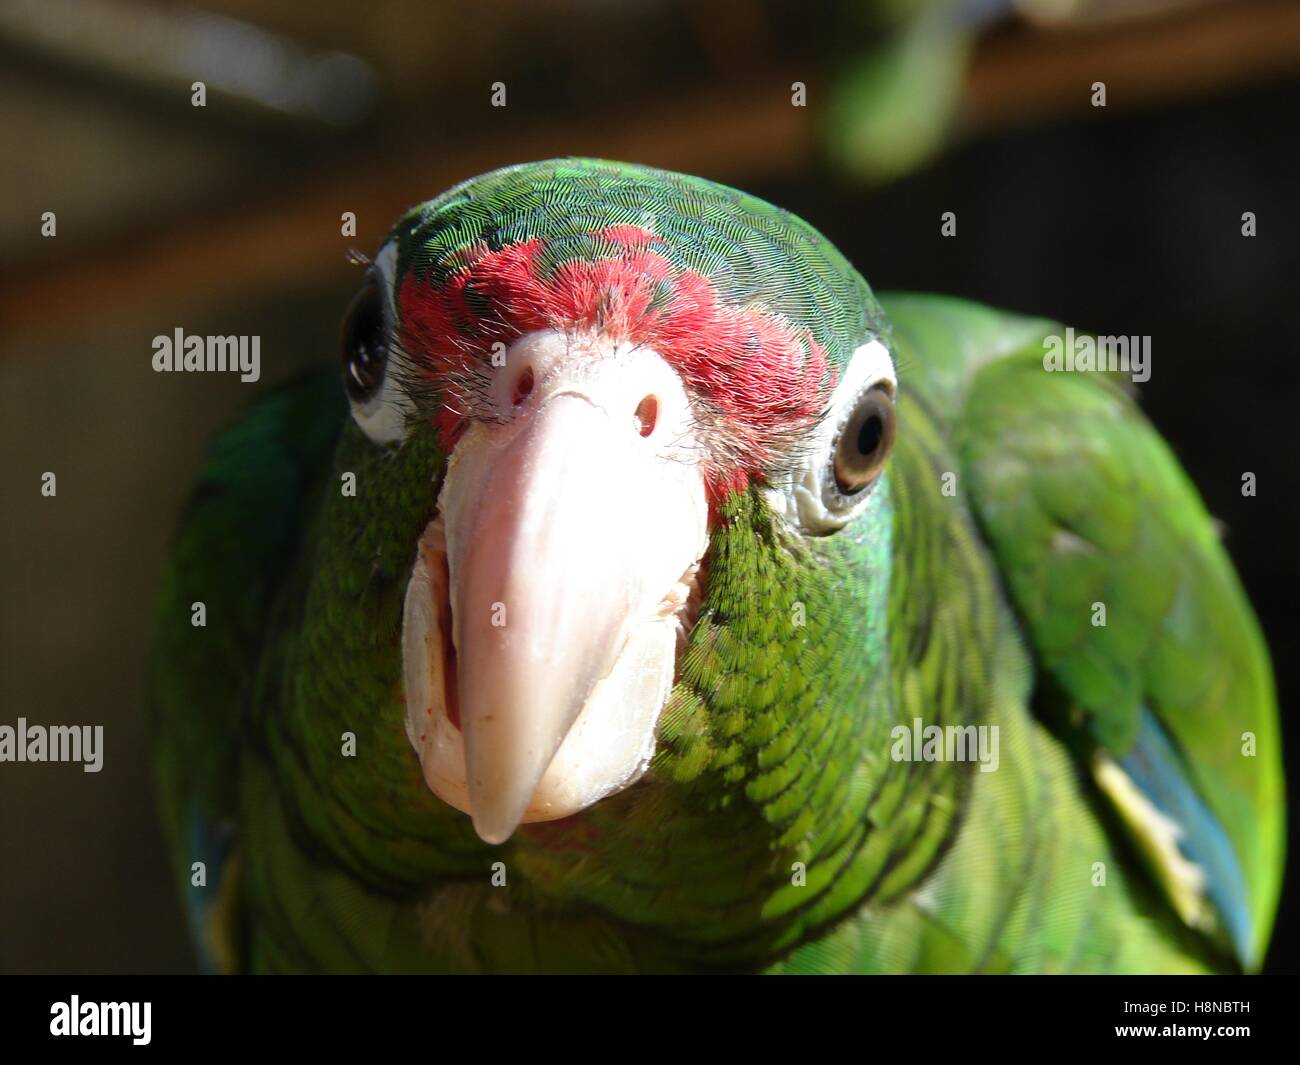 A close-up of a Puerto Rican parrot, an endangered species at the El Yunque National Forest Iguaca Aviary November 16, 2006 in Rio Grande, Puerto Rico. Stock Photo